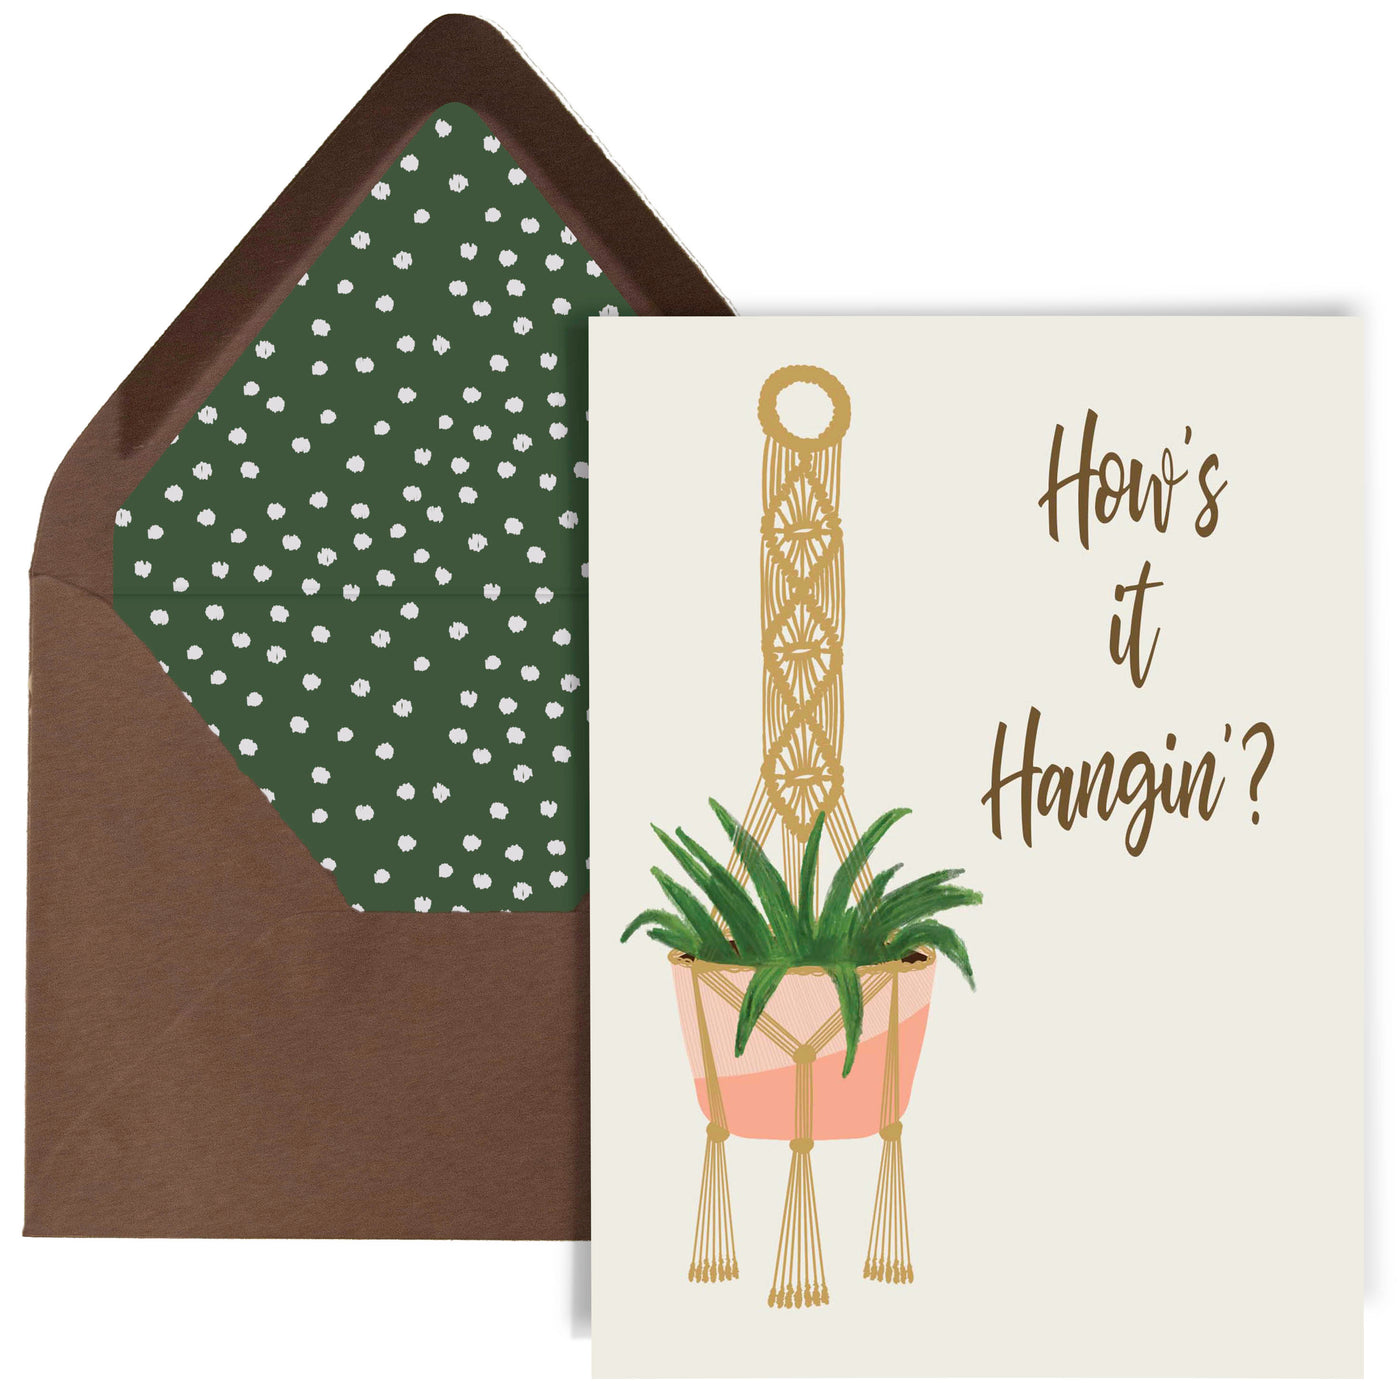 Hows It Hangin' Greeting card